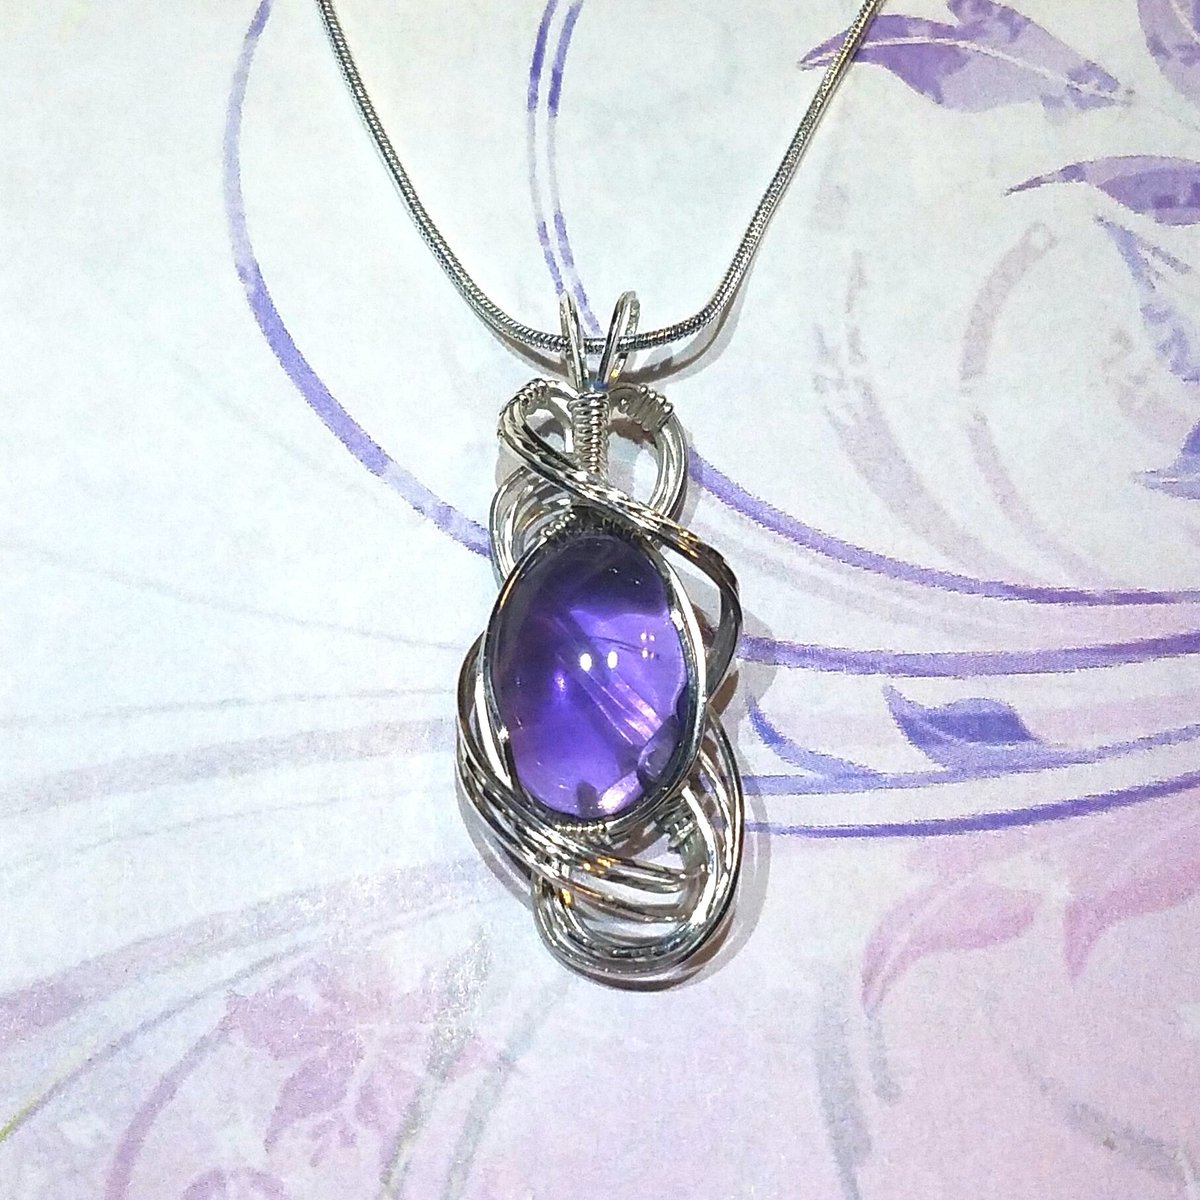 Purple Amethyst Pendant Womans Necklace Pendant Wire Wrapped Jewelry Handmade in Silver with Free Shipping tuppu.net/b8adba89 #handmade #jewelry #giftsforher #Etsy #mothersday #WireWrappedPendant